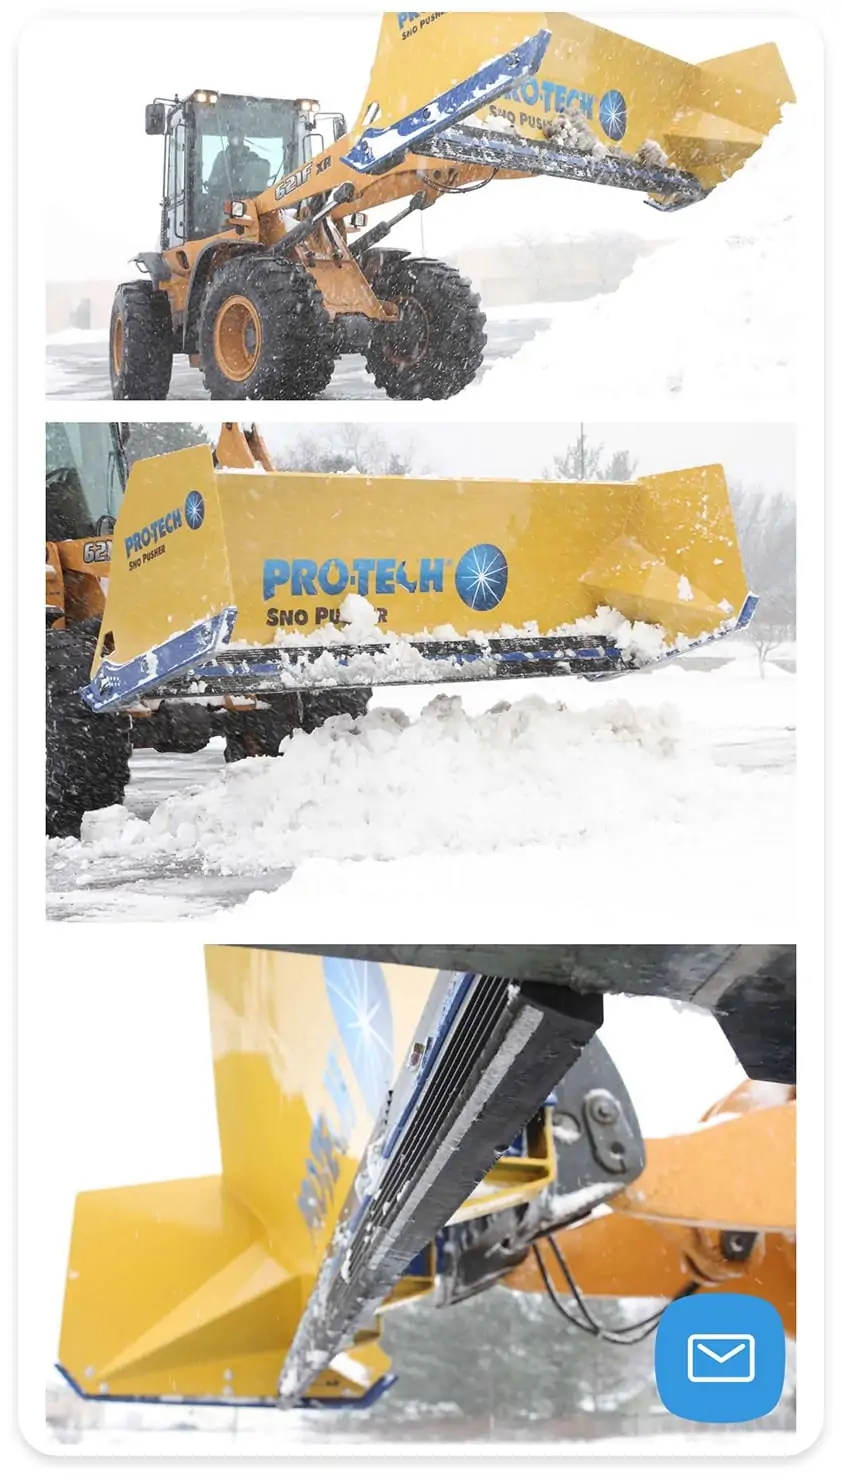 A yellow pro-tech snow pusher plowing snow 